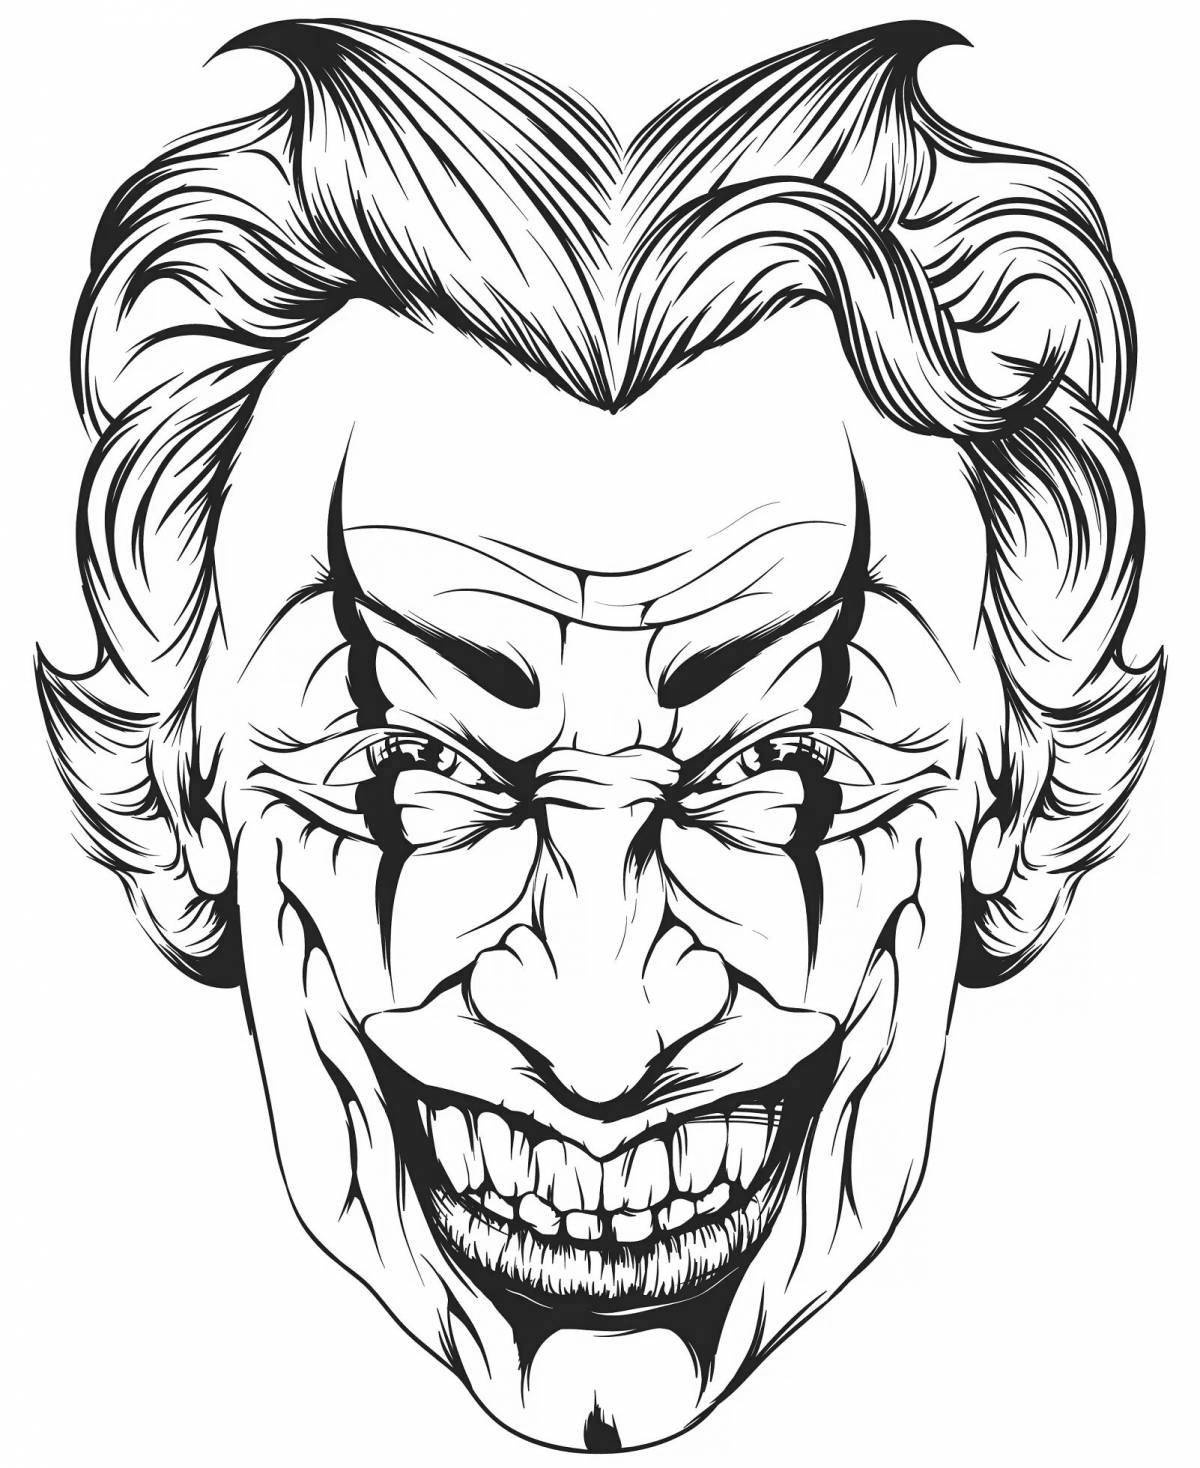 Vile scary face coloring page